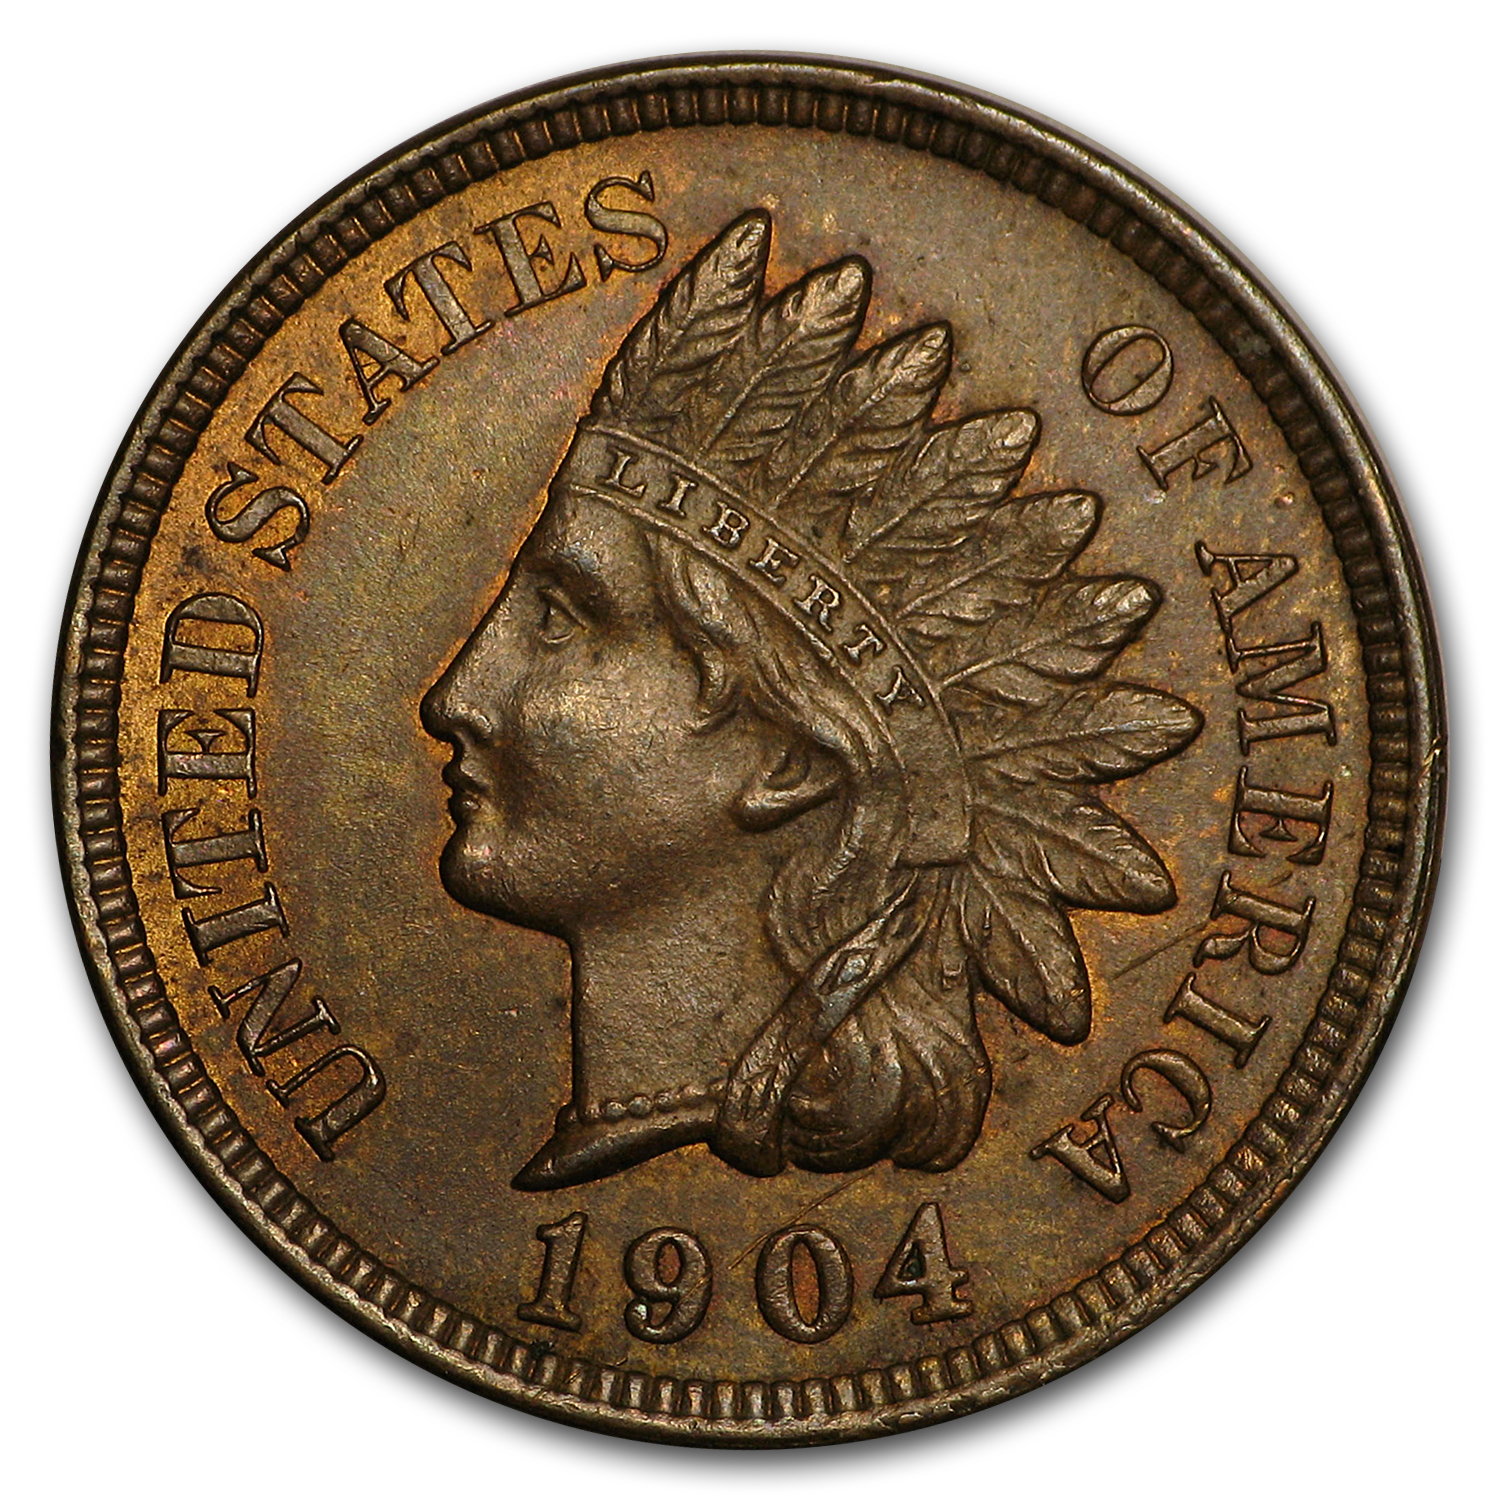 Buy 1904 Indian Head Cent BU (Red/Brown)